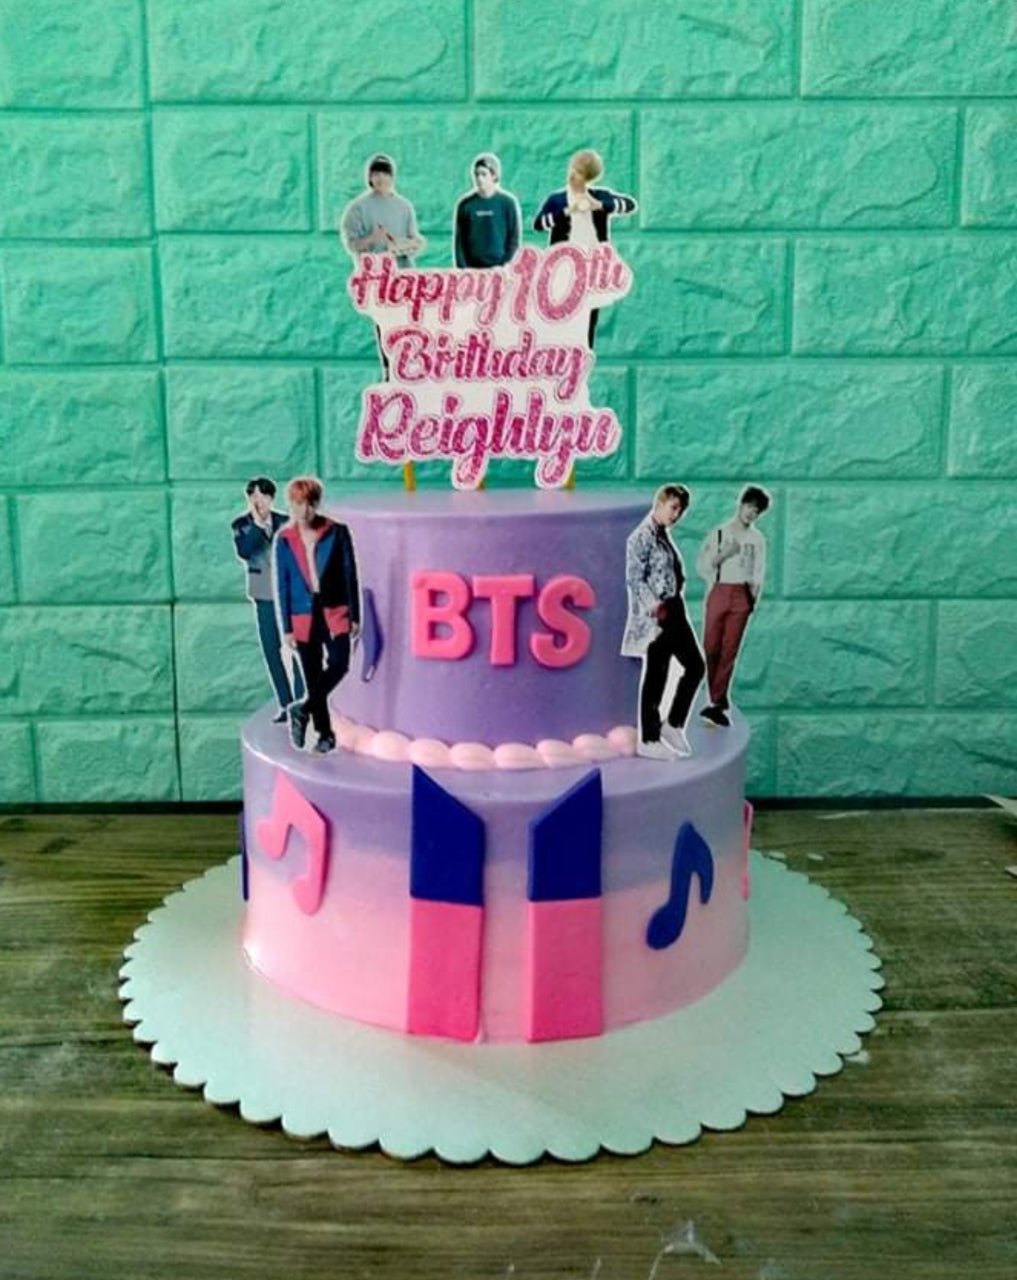 BTS Theme Cake – Cakes All The Way